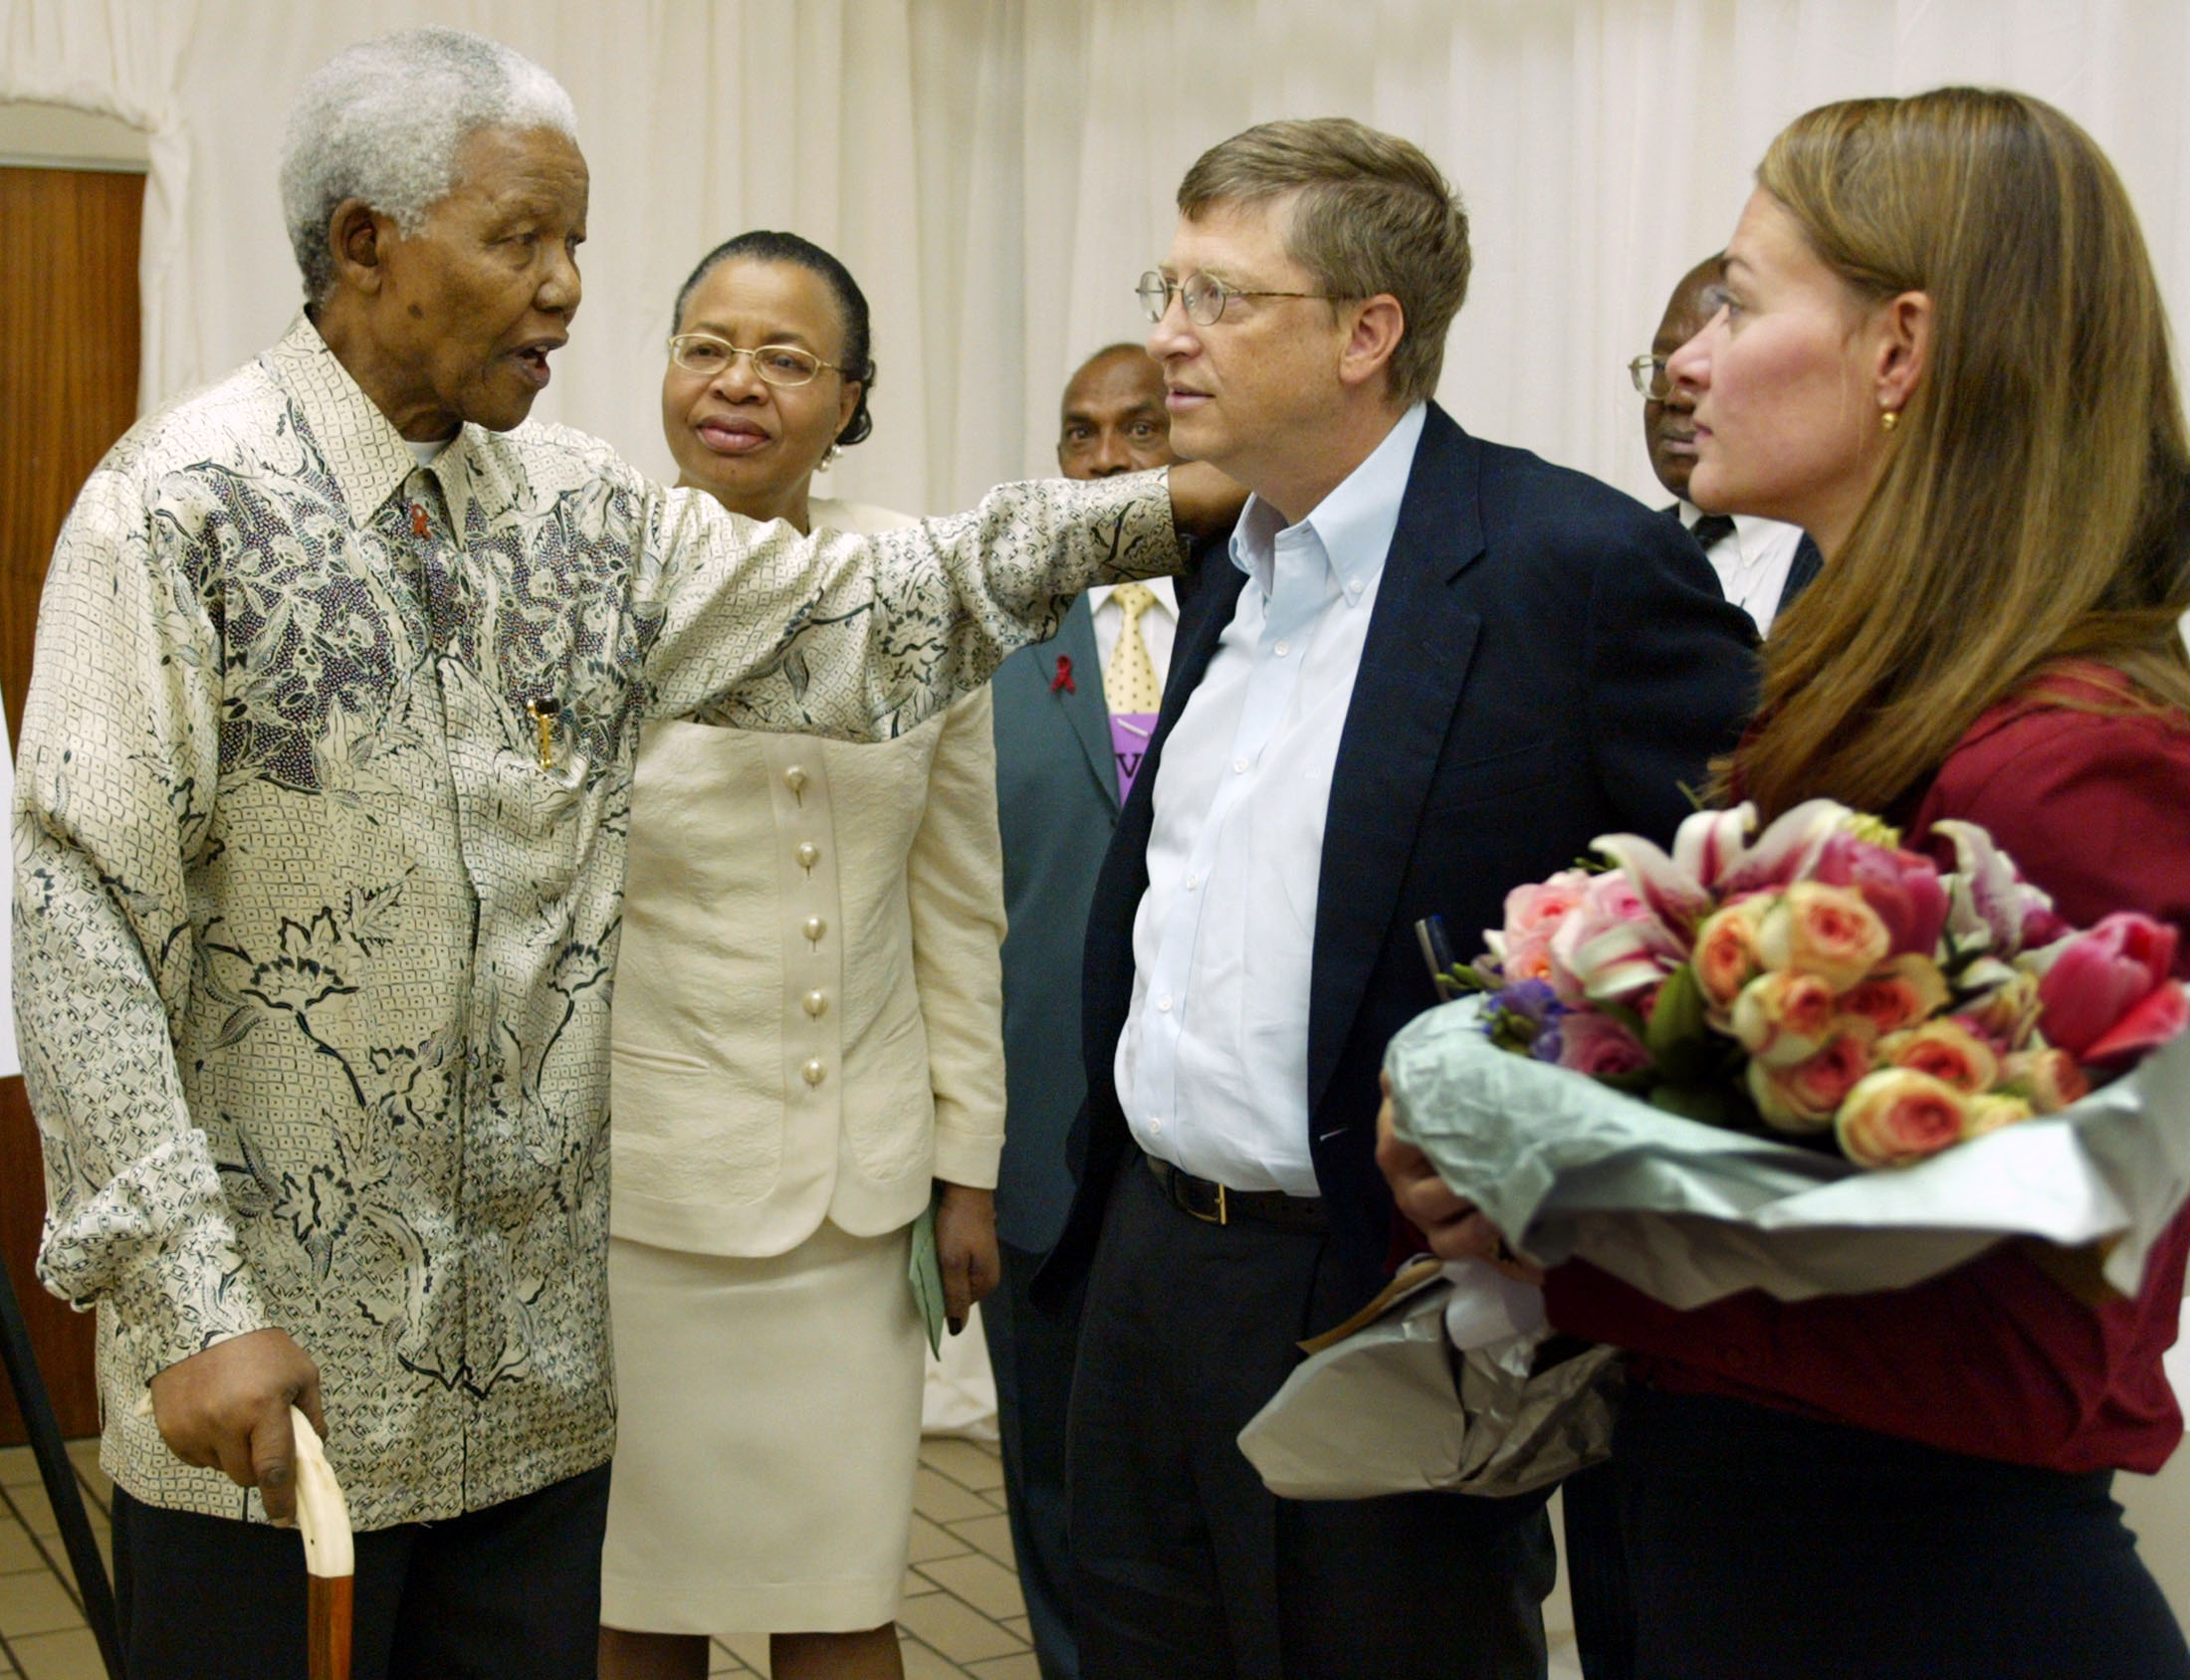 Former South African President Nelson Mandela (L) and his wife Graca Machel talk to Bill and Melinda Gates (R) at the end of a youth forum on HIV/AIDS at the University of Witwatersrand in Johannesburg, South Africa September 22, 2003. 